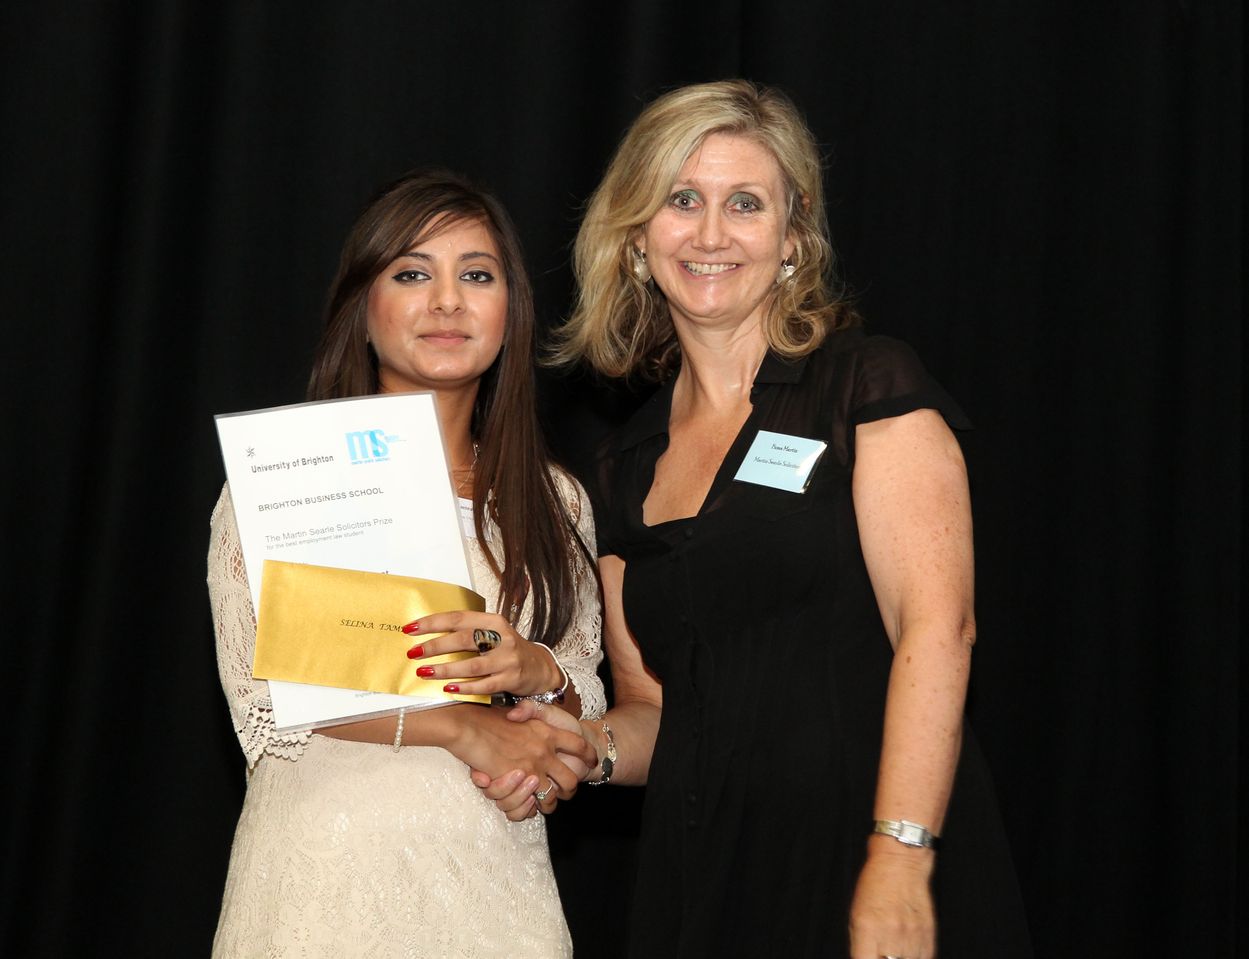 Selina Tamrat received the award for Best Employment Law Student from Fiona Martin